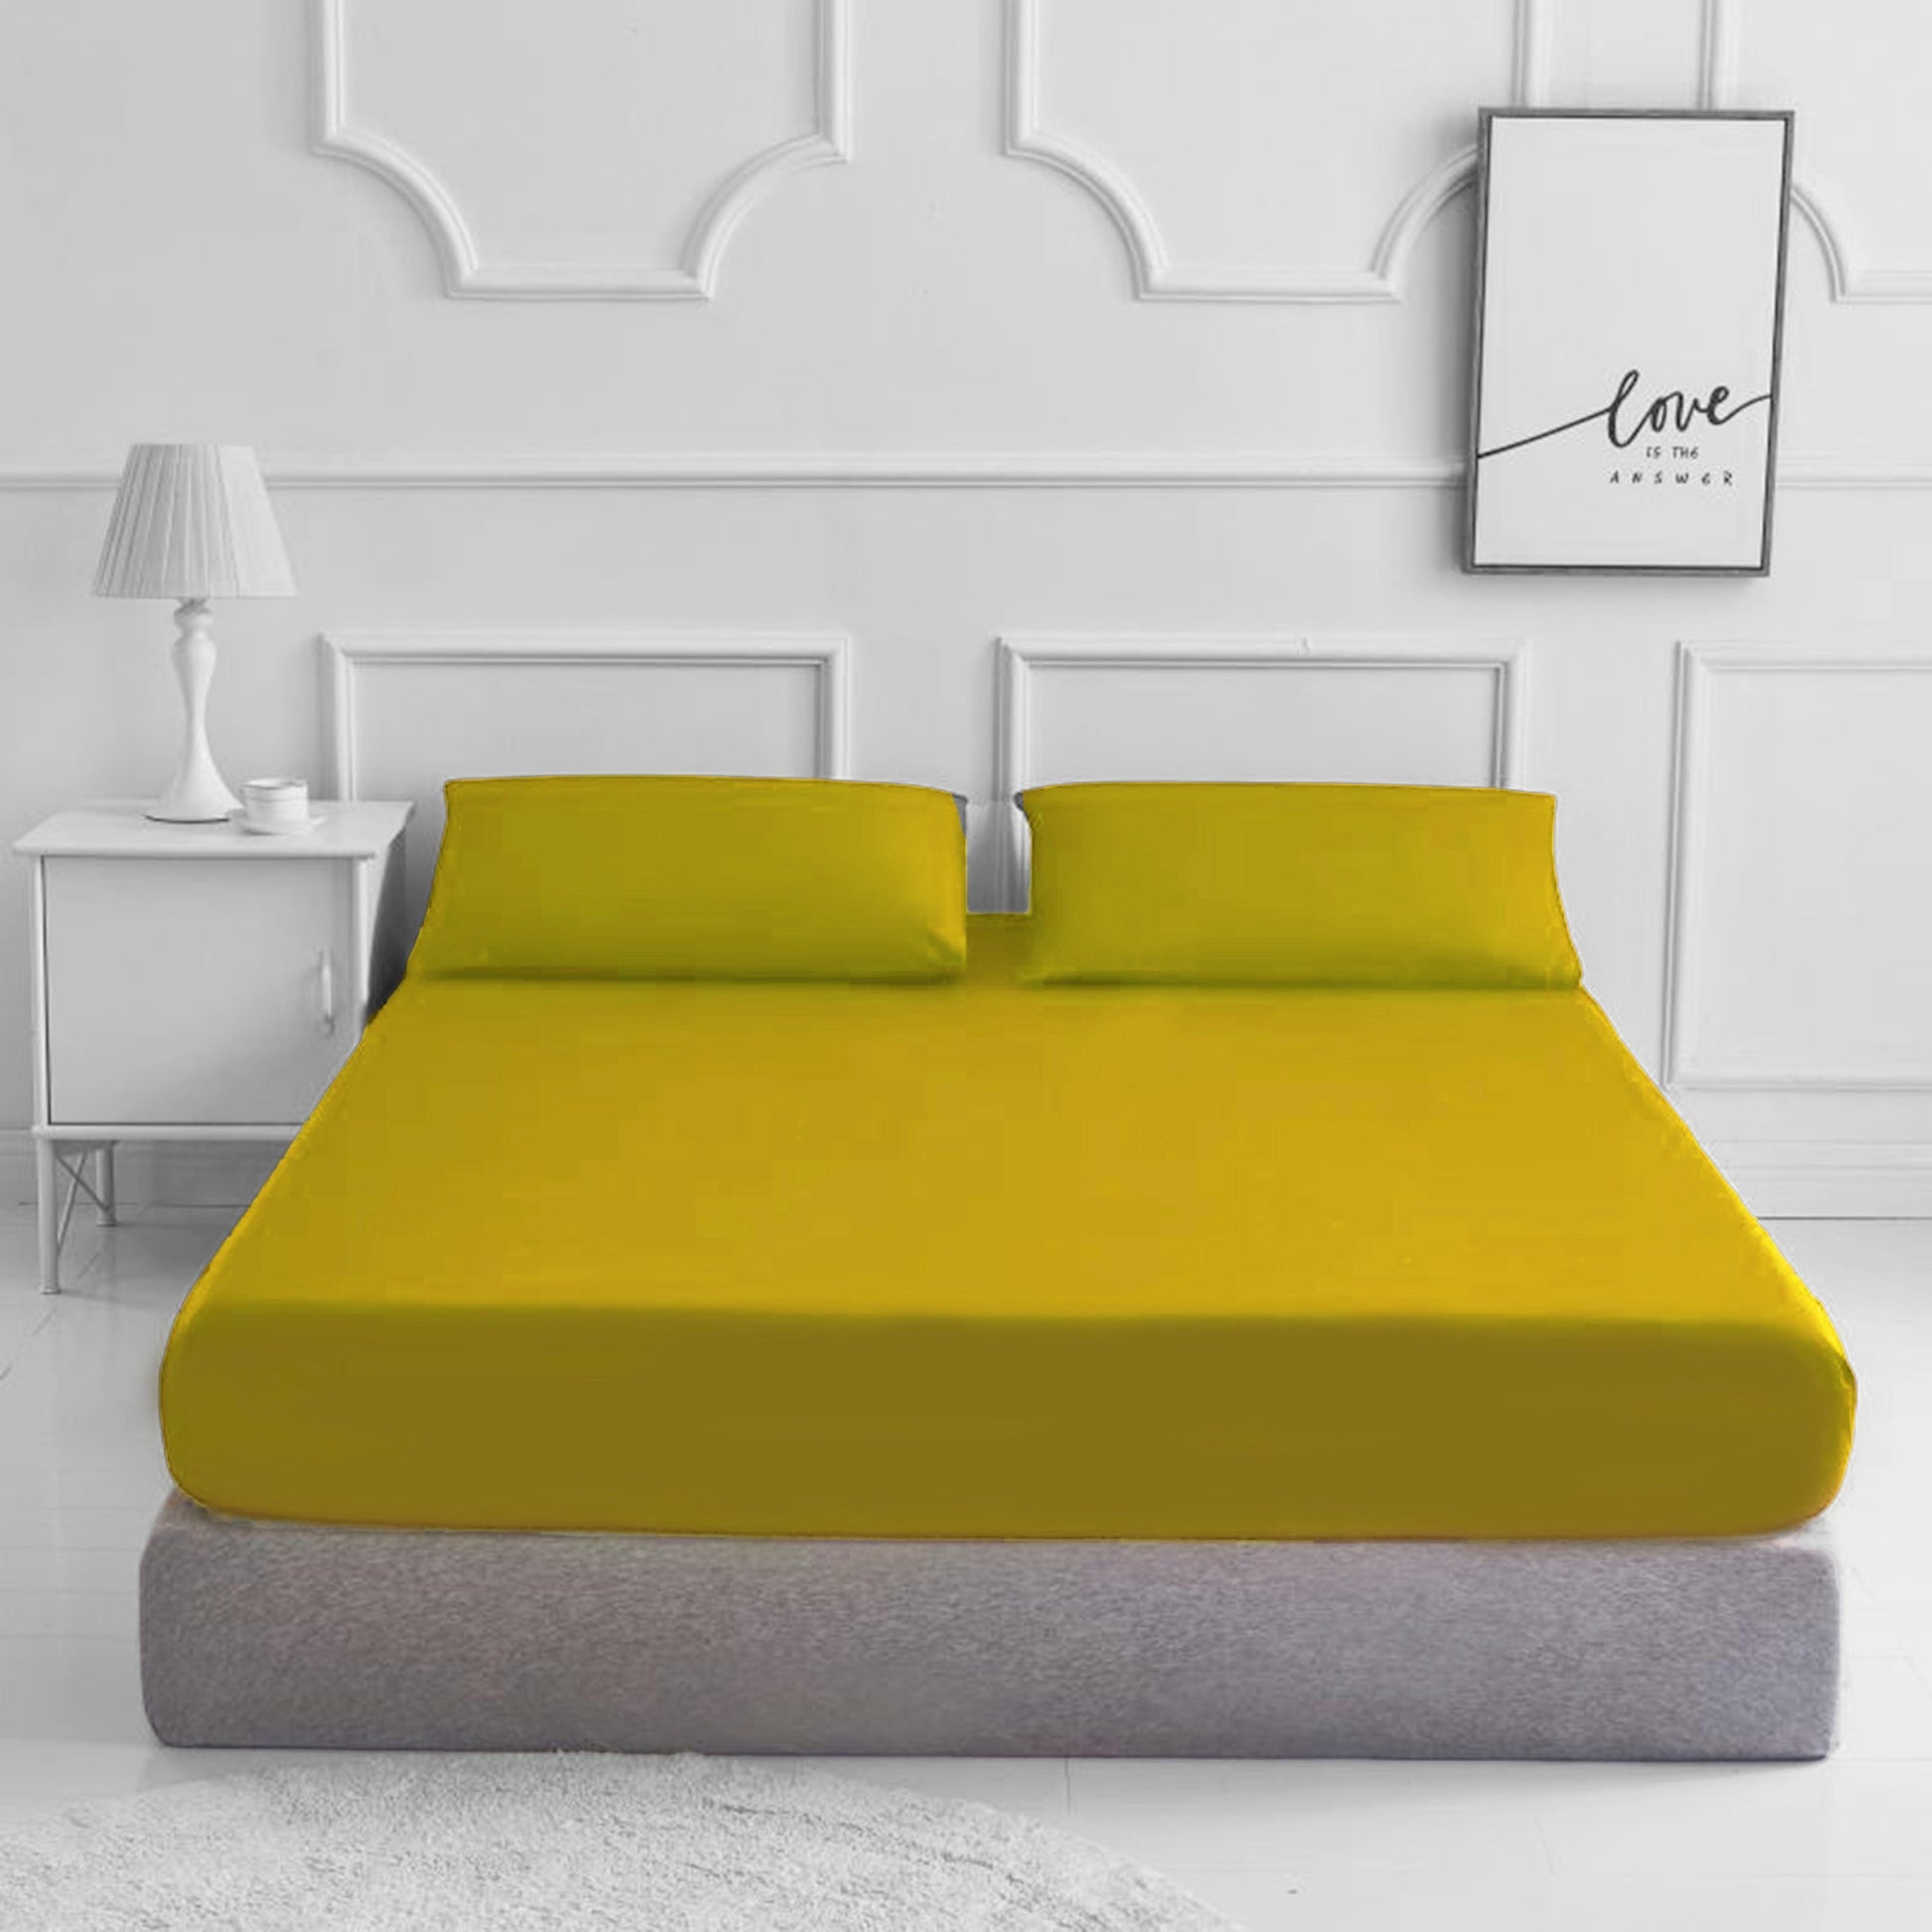 Fitted Bed Sheet Matching FREE 2 X PILLOW CASE Plain Dyed - TheComfortshop.co.ukBed Sheets0721718963585thecomfortshopTheComfortshop.co.ukPC FIT FREE PP Mustard KingMustardKingFitted Bed Sheet Matching FREE 2 X PILLOW CASE Plain Dyed - TheComfortshop.co.uk